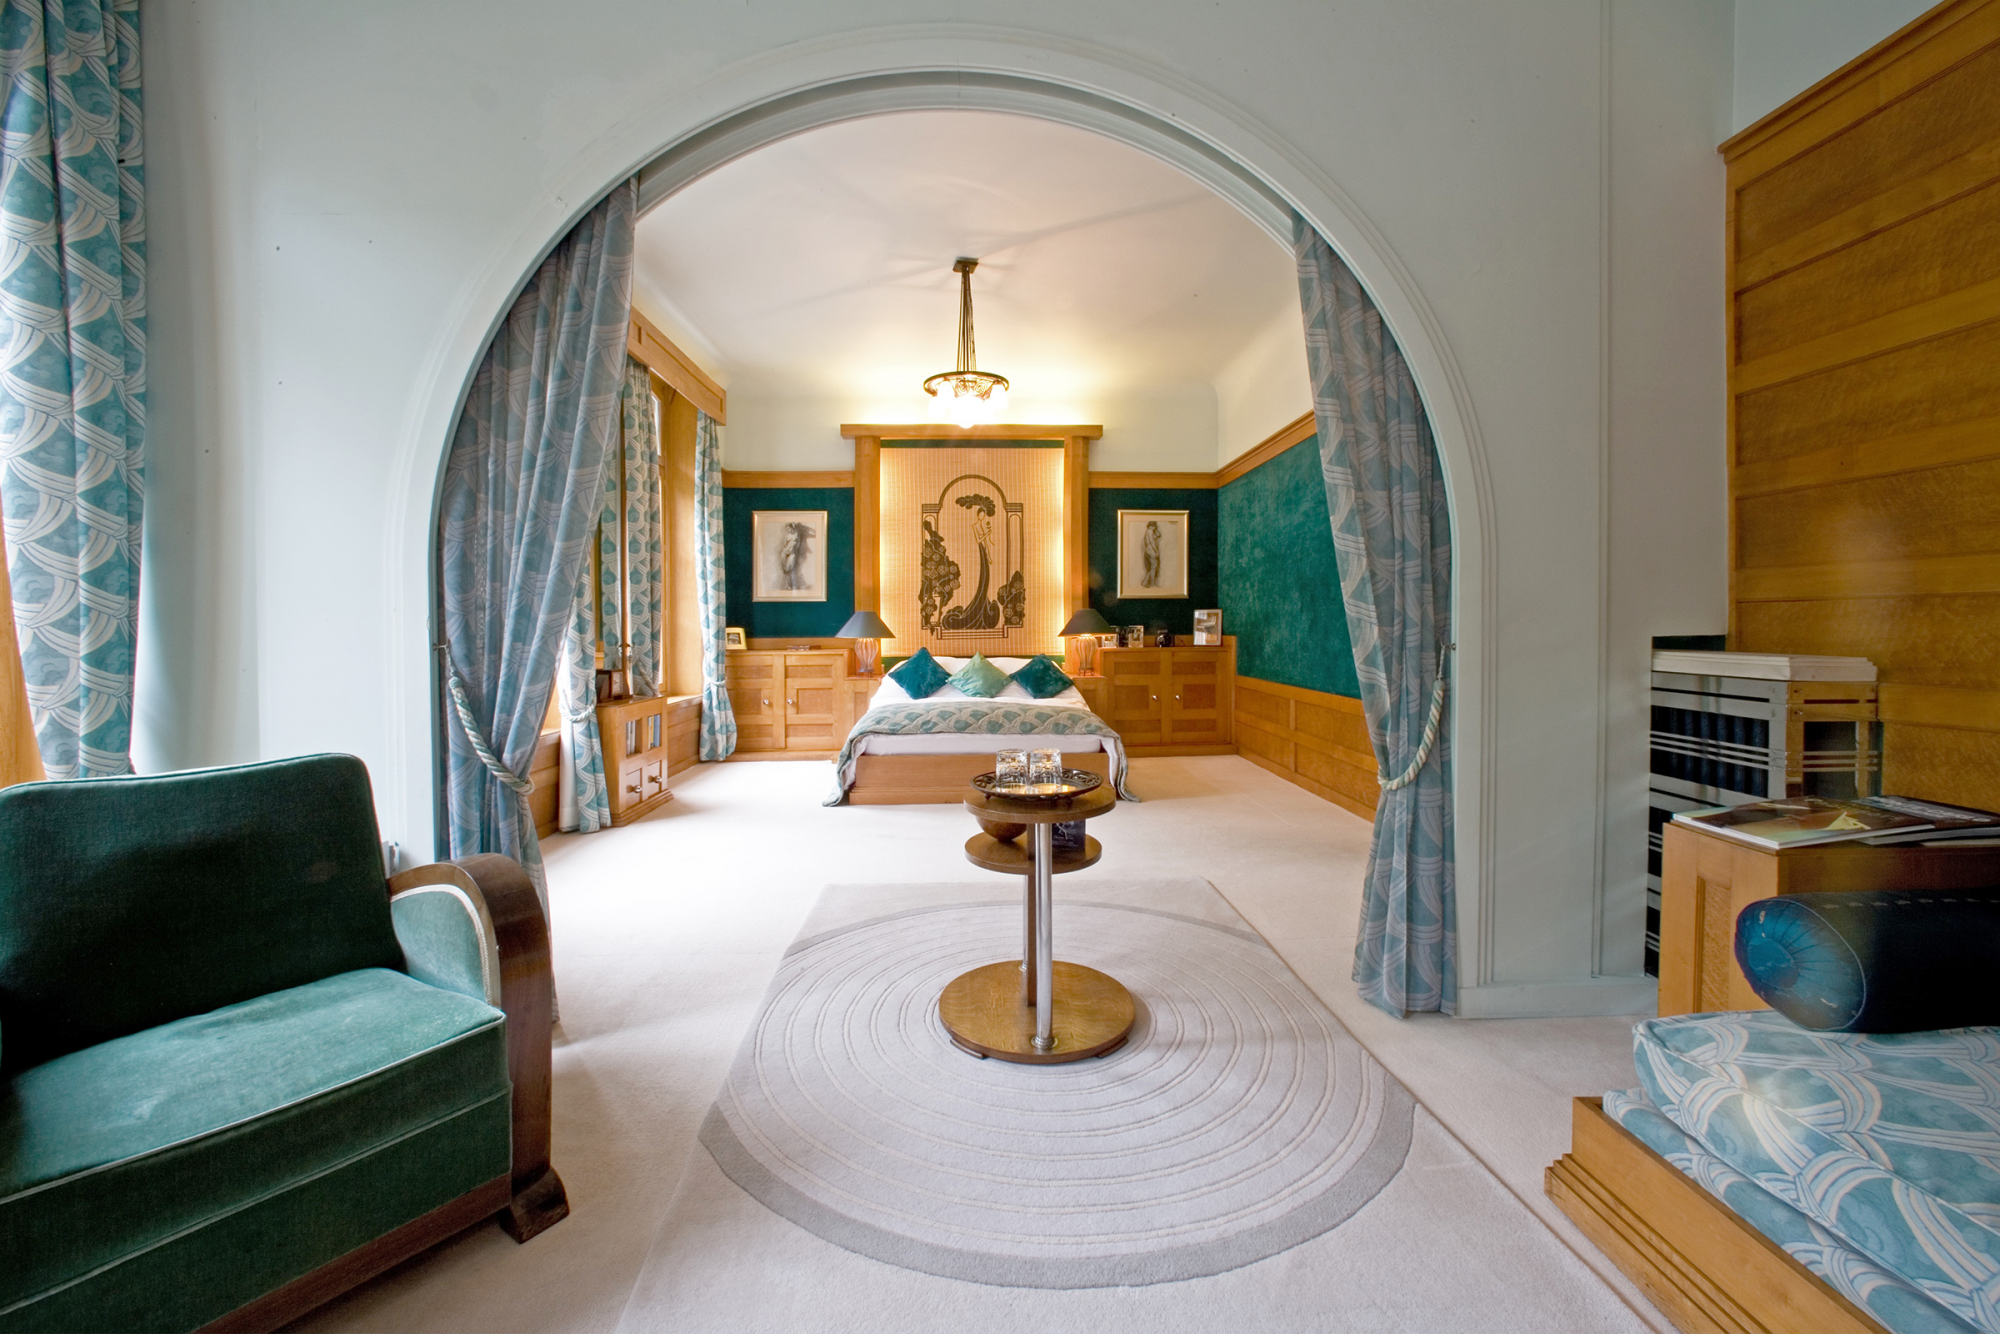 The 1920's Art Deco suite This large suite of rooms showcases original sycamore and birds-eye maple panelling and furnishings with large bed and separate sitting area.